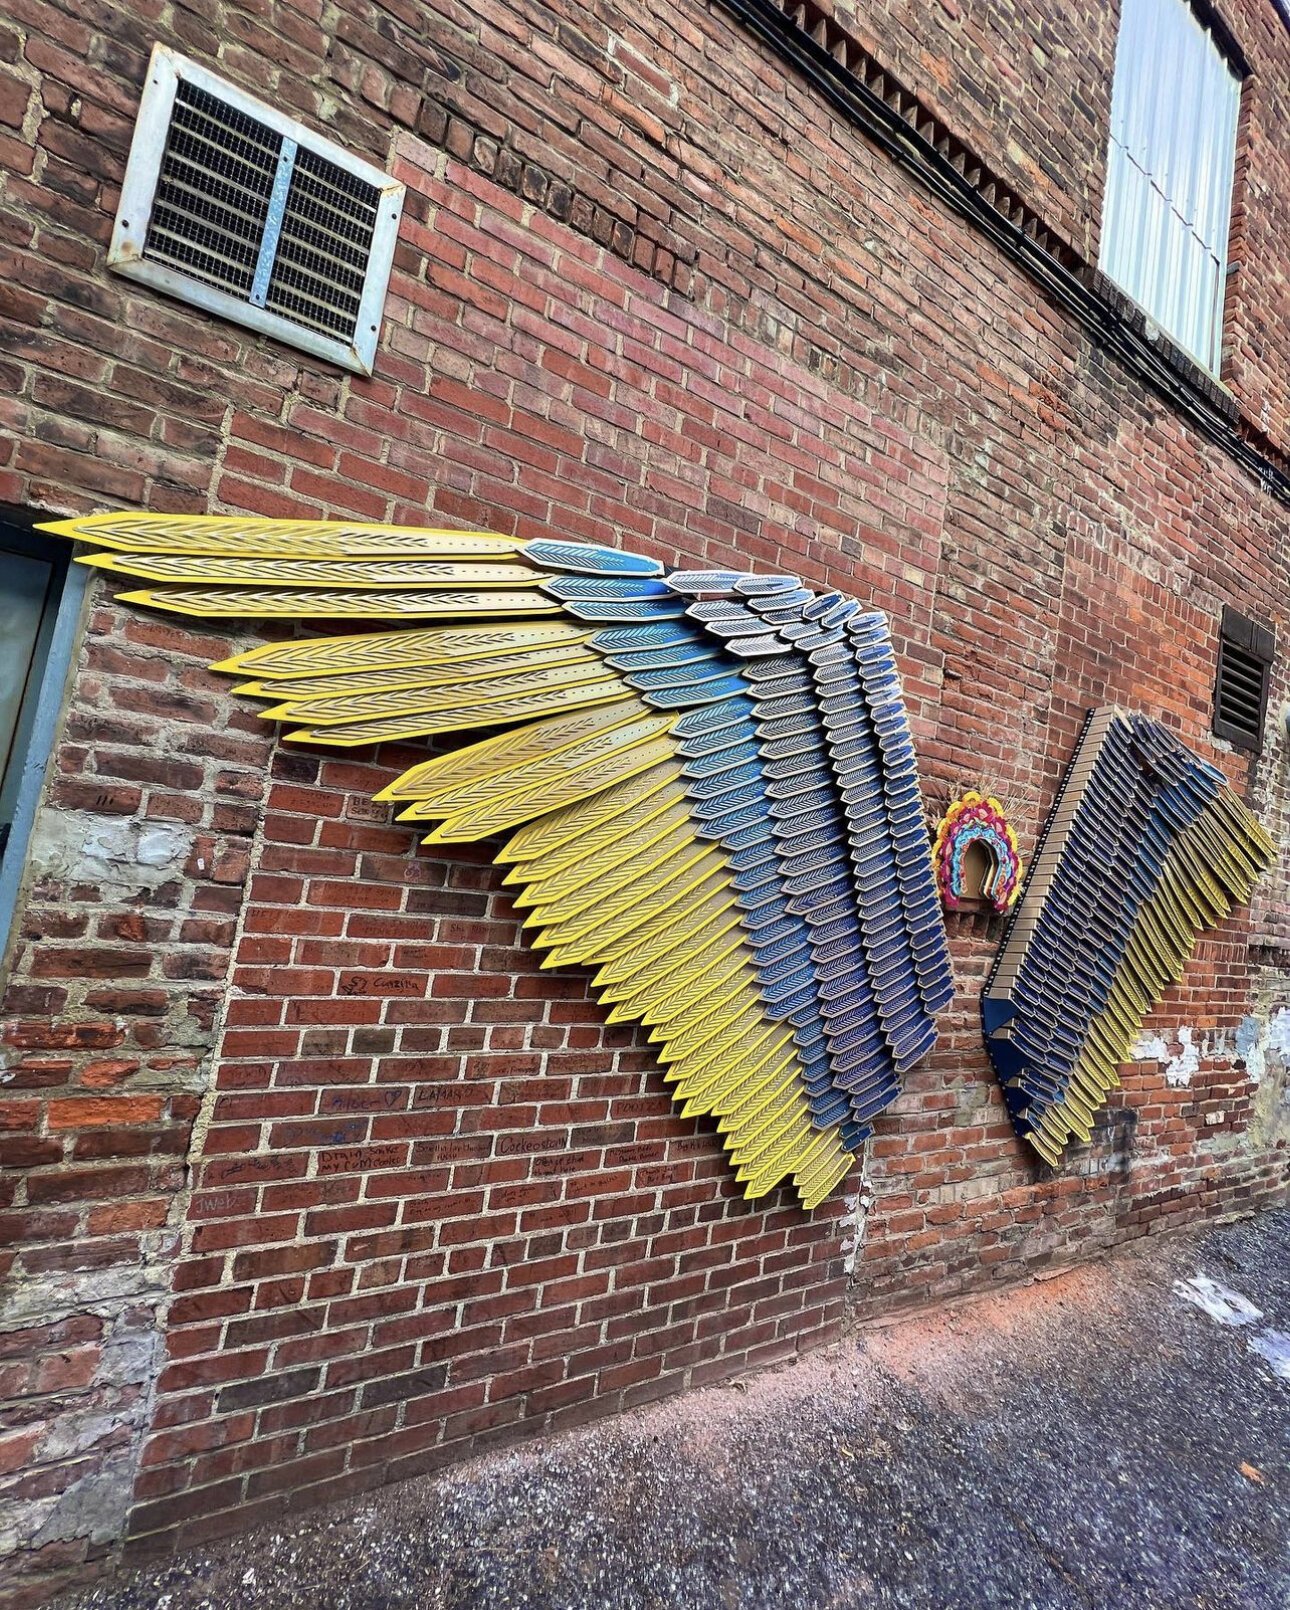 “Na Krylah Nadi,” which translates to “On Wings Of Hope," is a fifteen foot wide art installation Downtown Fort Wayne.